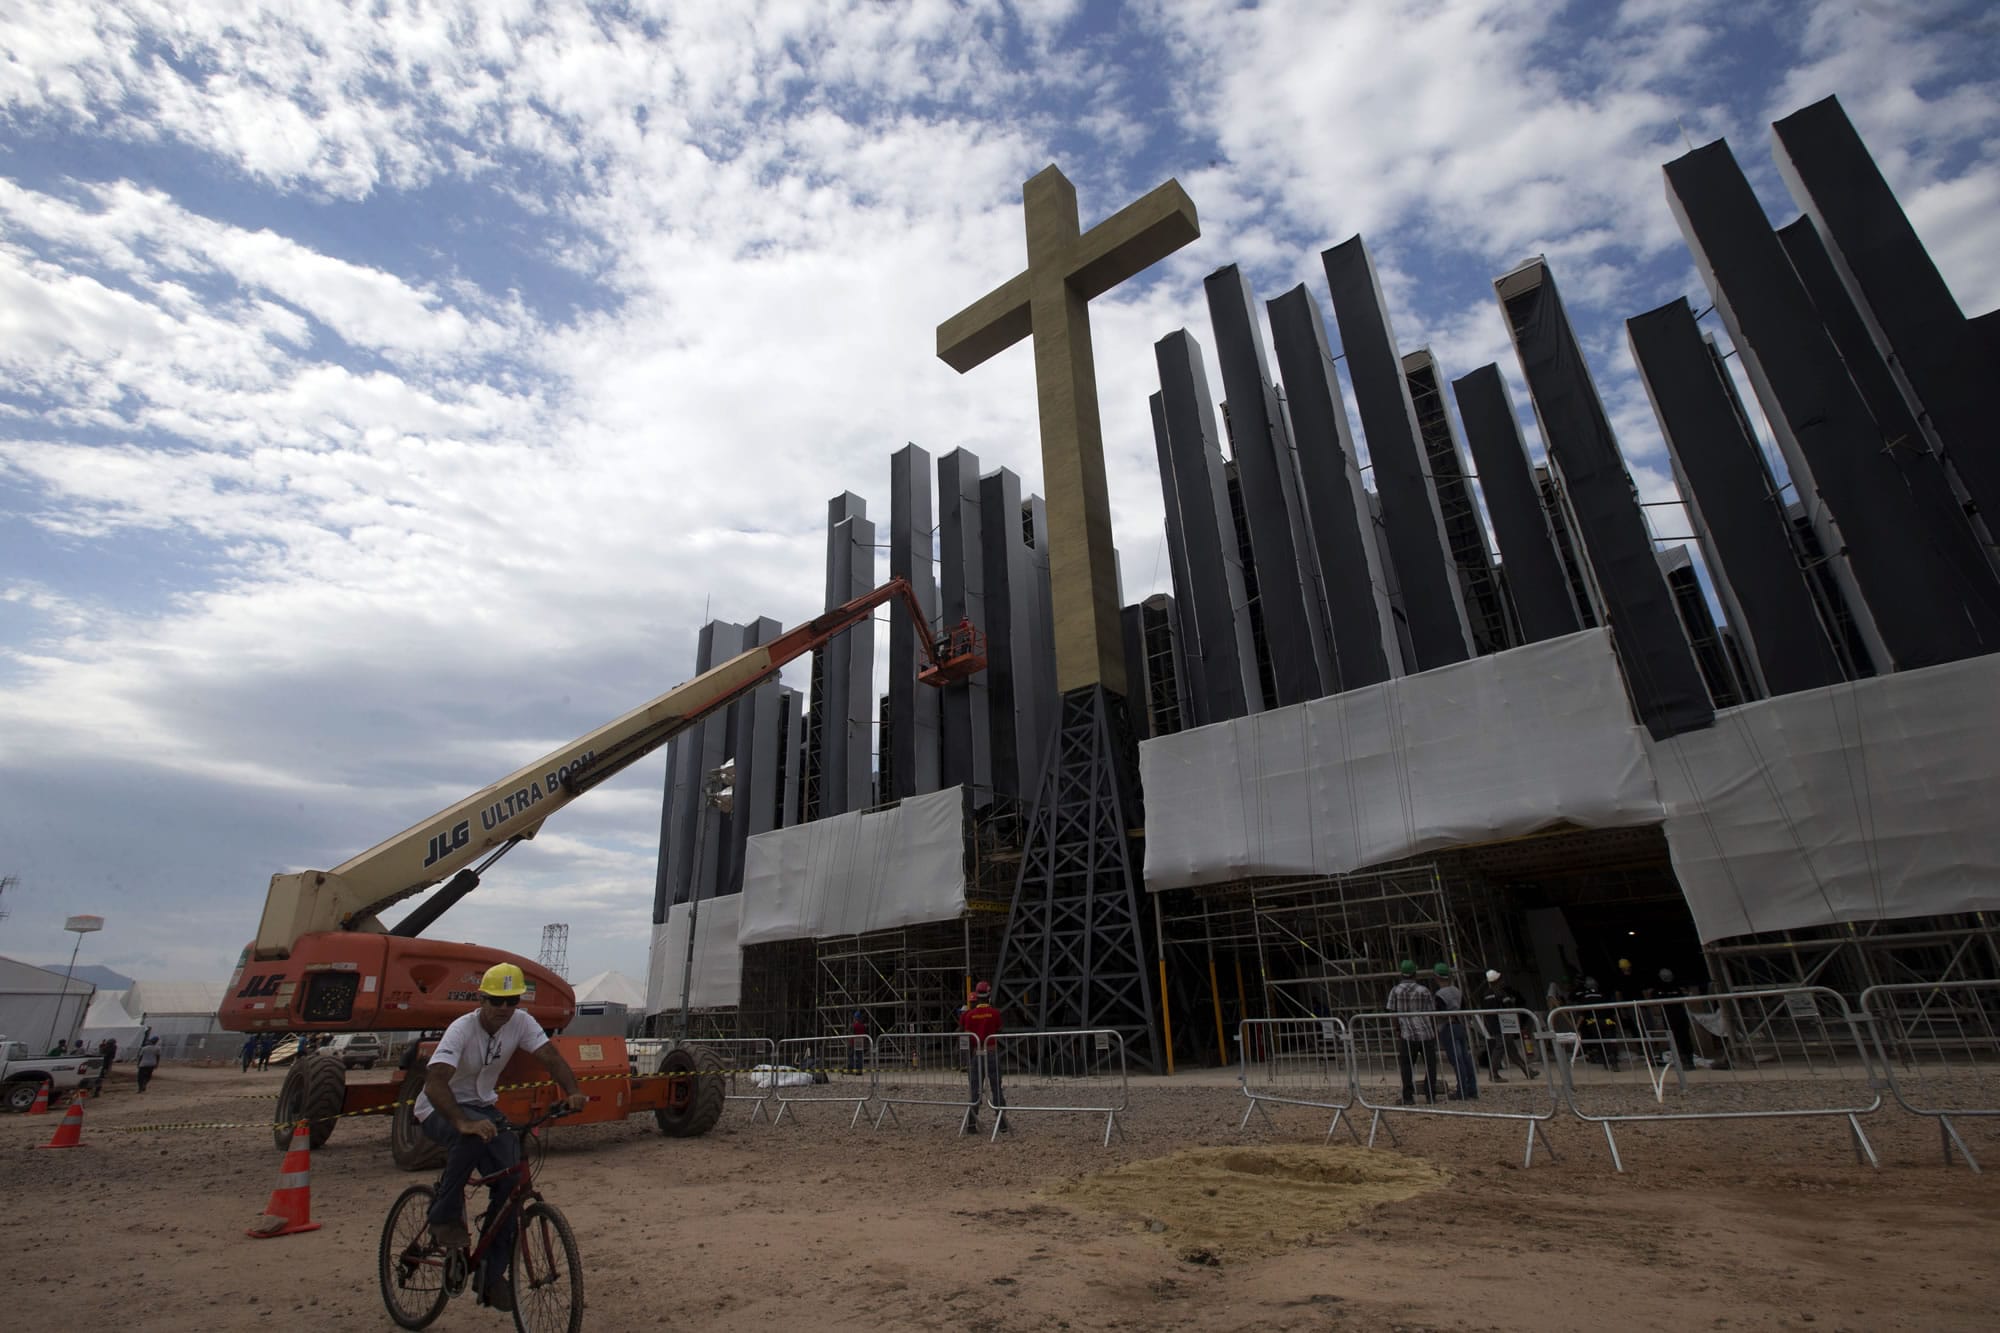 A worker rides a bicycle Sunday as the stage where Pope Francis will deliver mass next week is being prepared in Guaratiba, some 40 km. south of Rio de Janeiro, Brazil.